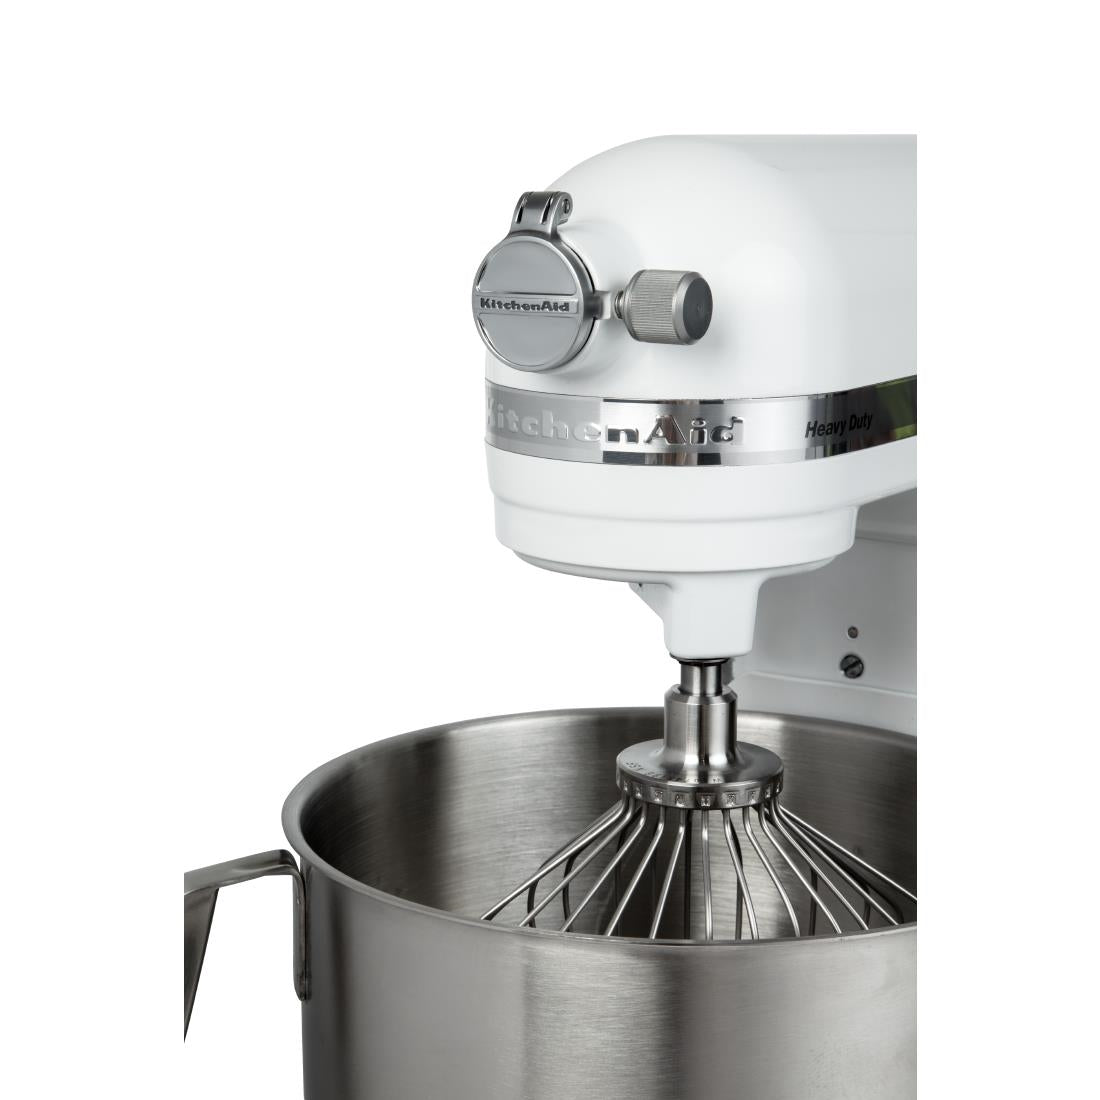 KitchenAid Heavy Duty Stand Mixer 5KSM7591XBWH JD Catering Equipment Solutions Ltd